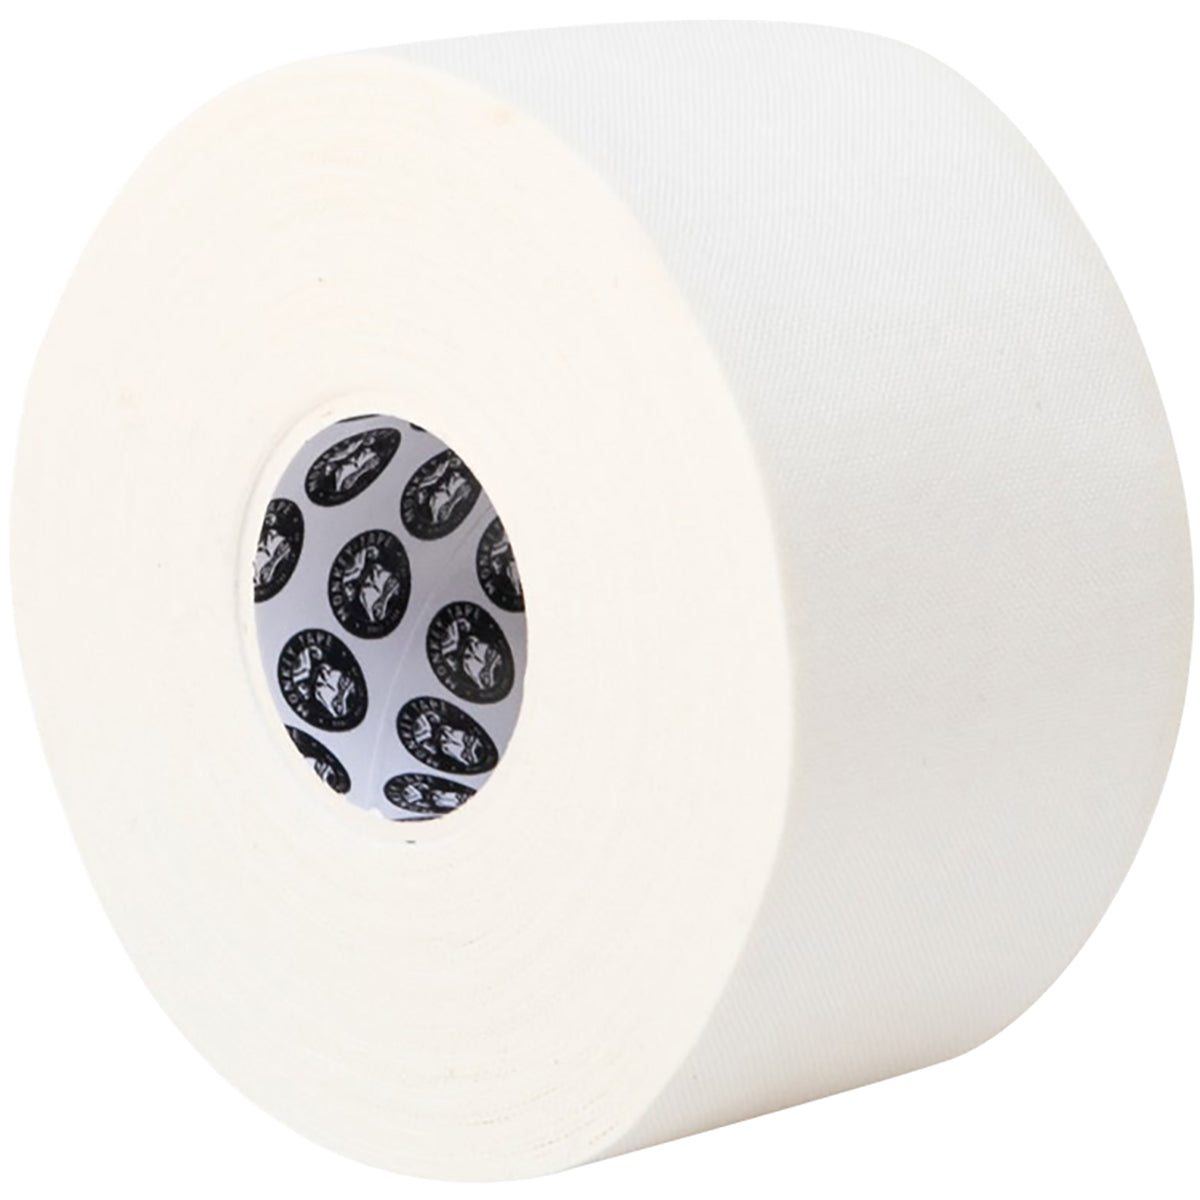 Monkey Tape 1-Pack (1, 1.5, or 2") x 15 yds Premium Sports Athletic Trainer Tape Monkey Tape